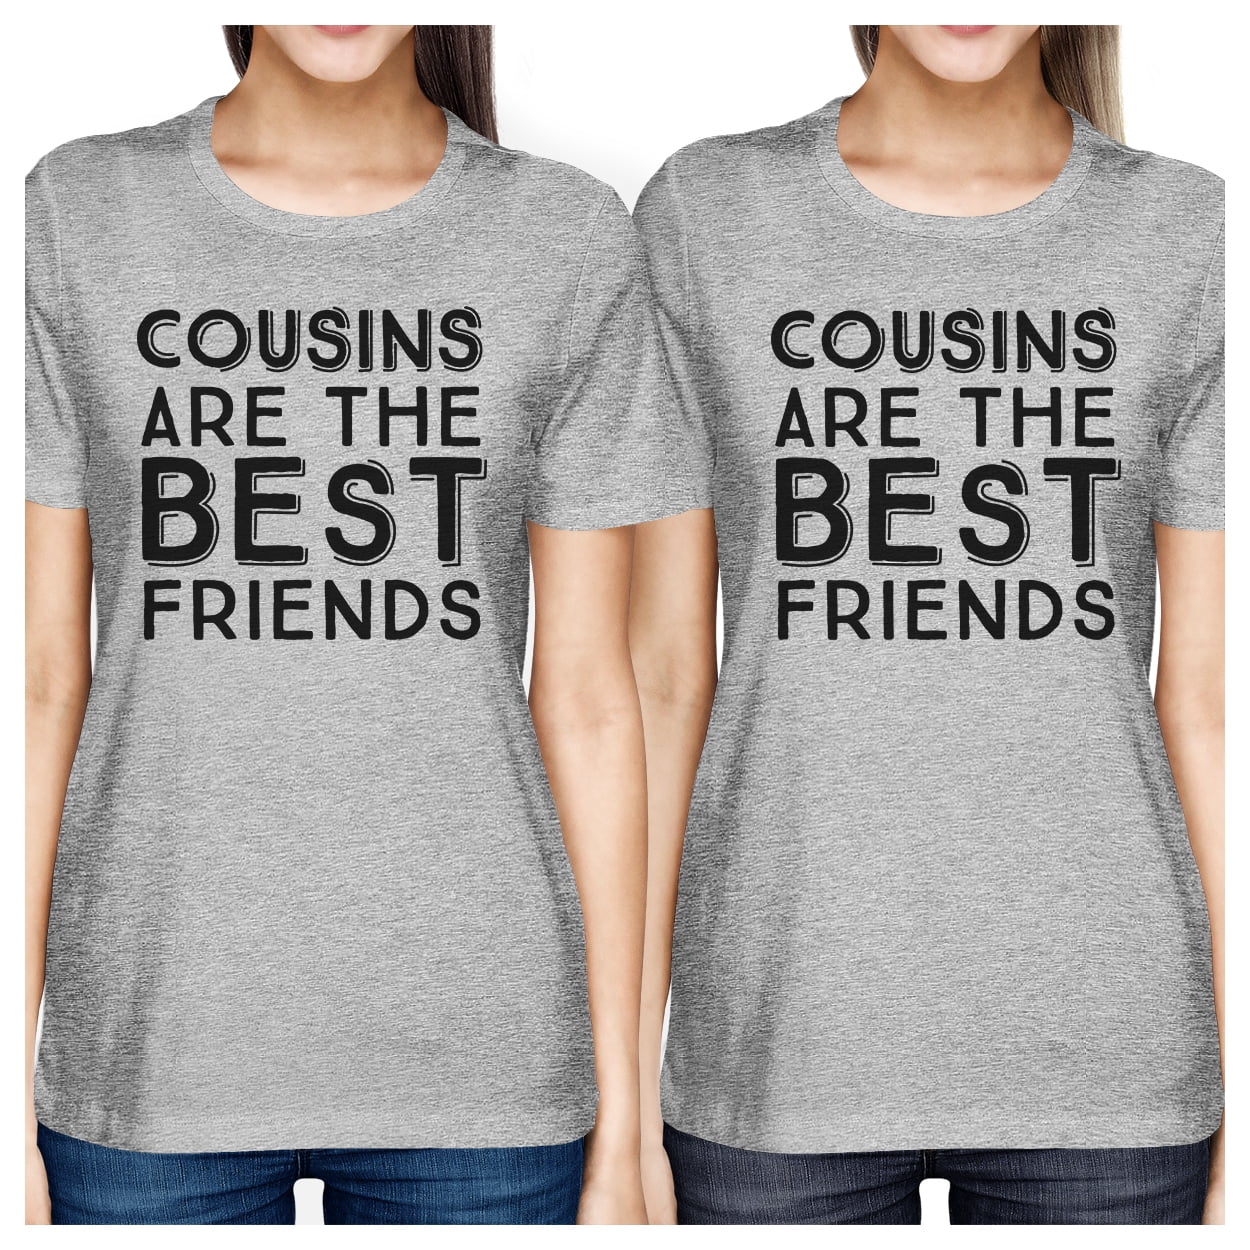 Cousins Make The Best Friend T-Shirt for Baby and Toddler Girls Fun Family Outfits